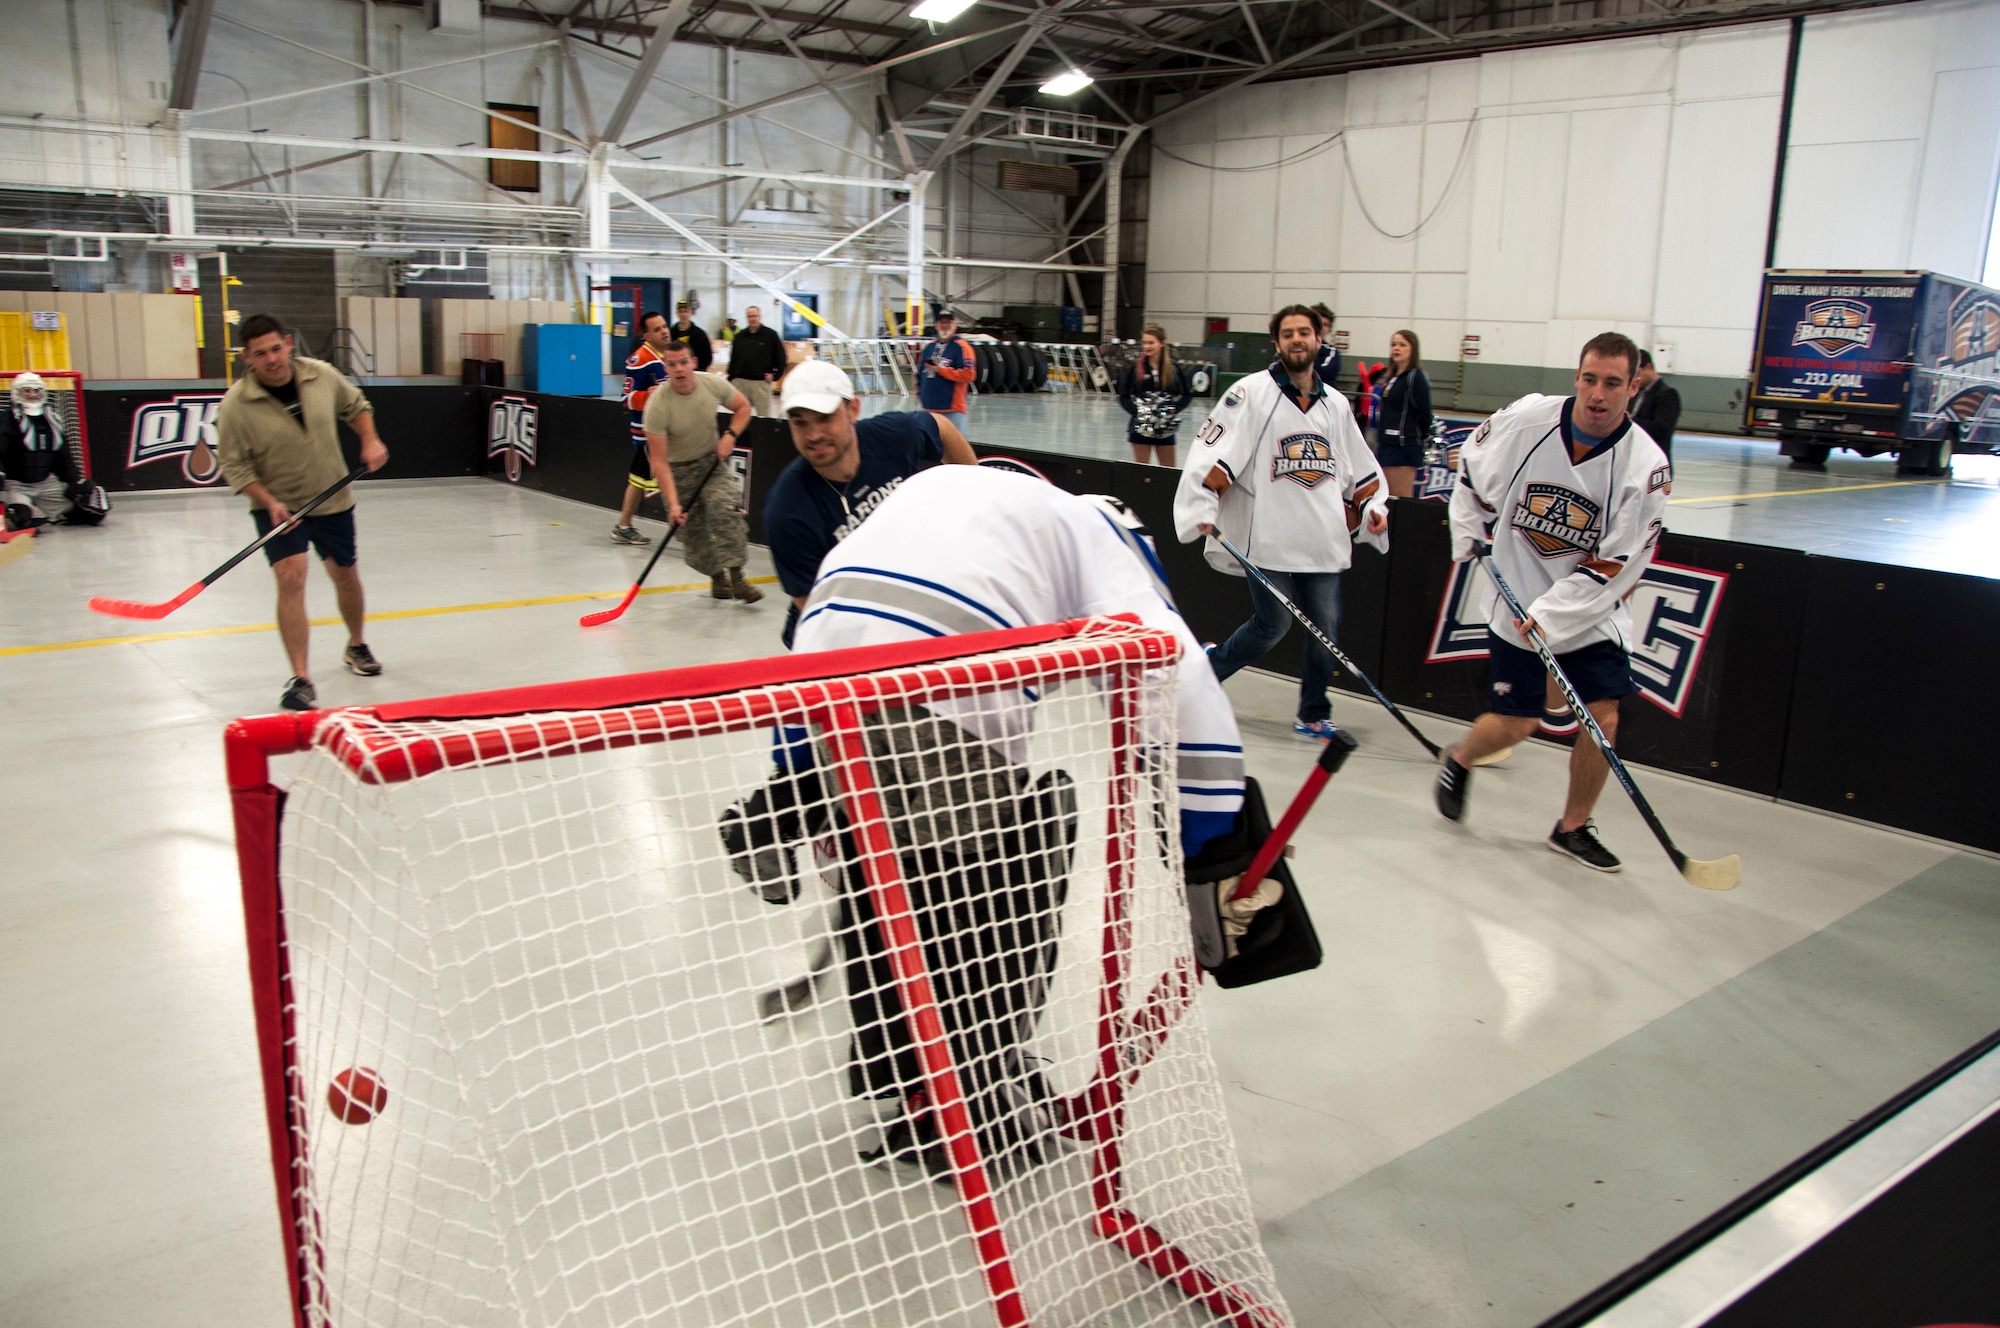 Oklahoma City Barons’ Bradley Hunt scorches 507th Operations Group Intelligence Superintendent Senior Master Sgt. Bob Gaspar on a shot from the corner of the makeshift rink during the floor hockey game here January 14, 2014.  Hunt was one of four Barons players to volunteer for the game here as part of a winning raffle by 507th Civil Engineering Squadron’s Senior Master Sgt. Daniel Bostwick.  Five members from the 507th and 137th Oklahoma Air National Guard Air Refueling Wings participated in the game as dozens more took time to come watch.  The four Barons hockey players along with two cheerleaders toured a KC-135R Stratotanker prior to the game.  The Oklahoma City Barons are part of the National Hockey League’s Edmonton Oilers.  (U.S. Air Force photo/Senior Airman Mark Hybers)